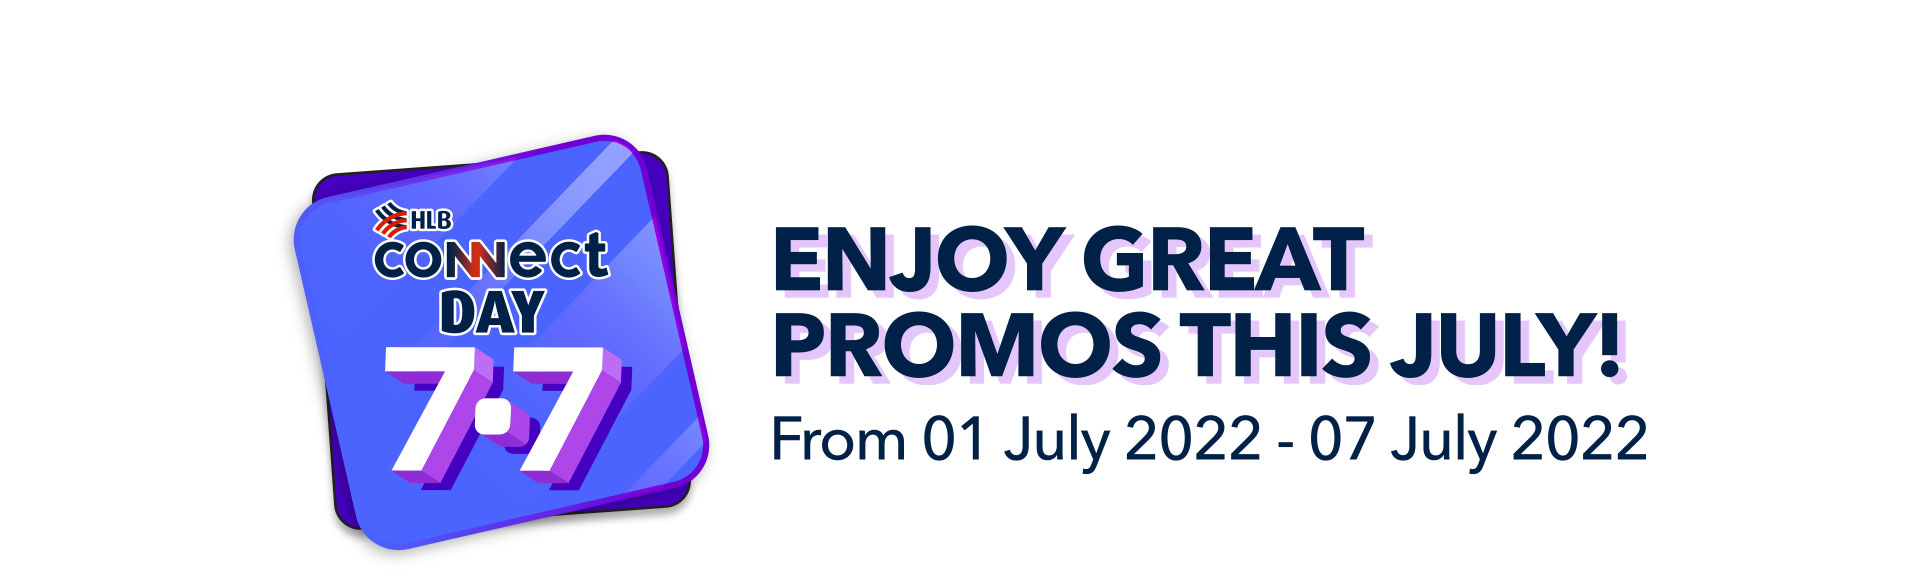 ENJOY GREAT PROMOS THIS JULY!